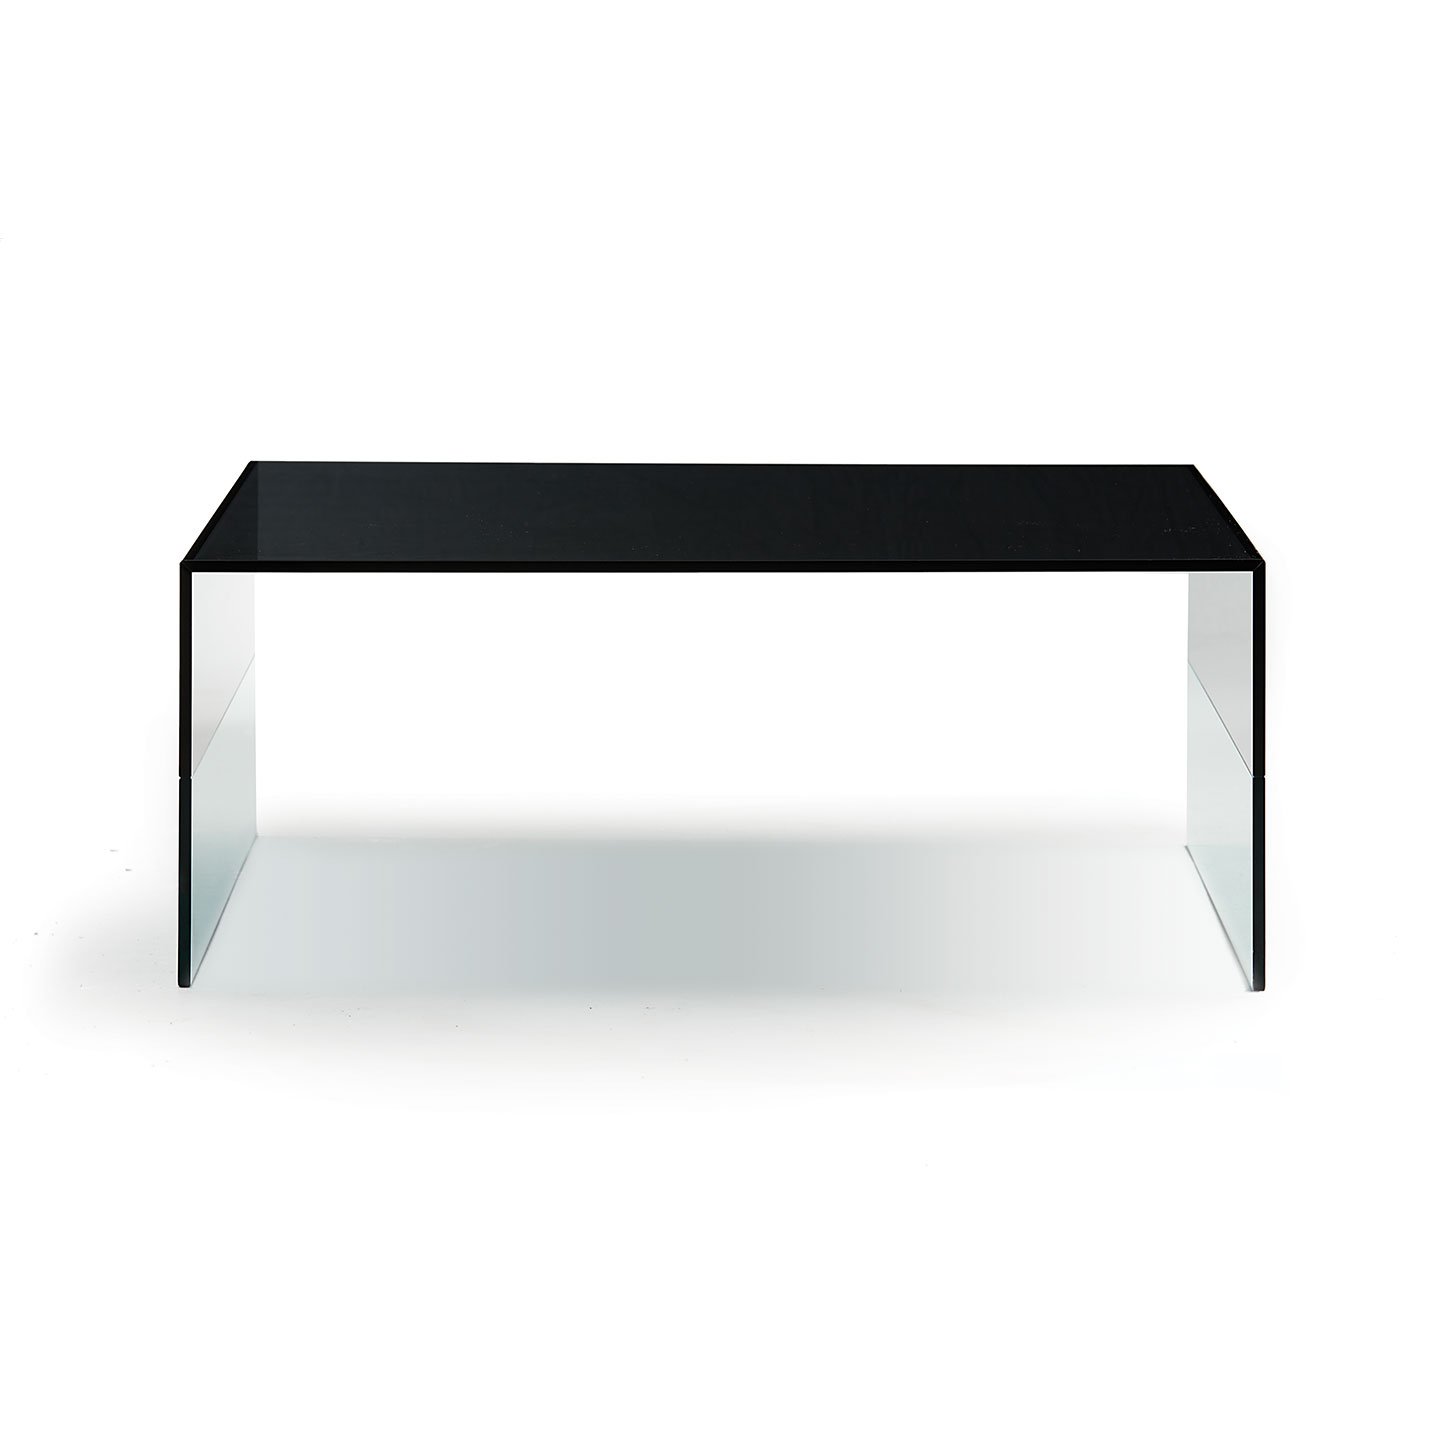 Haworth Smoke Table with square shape and smoked glass